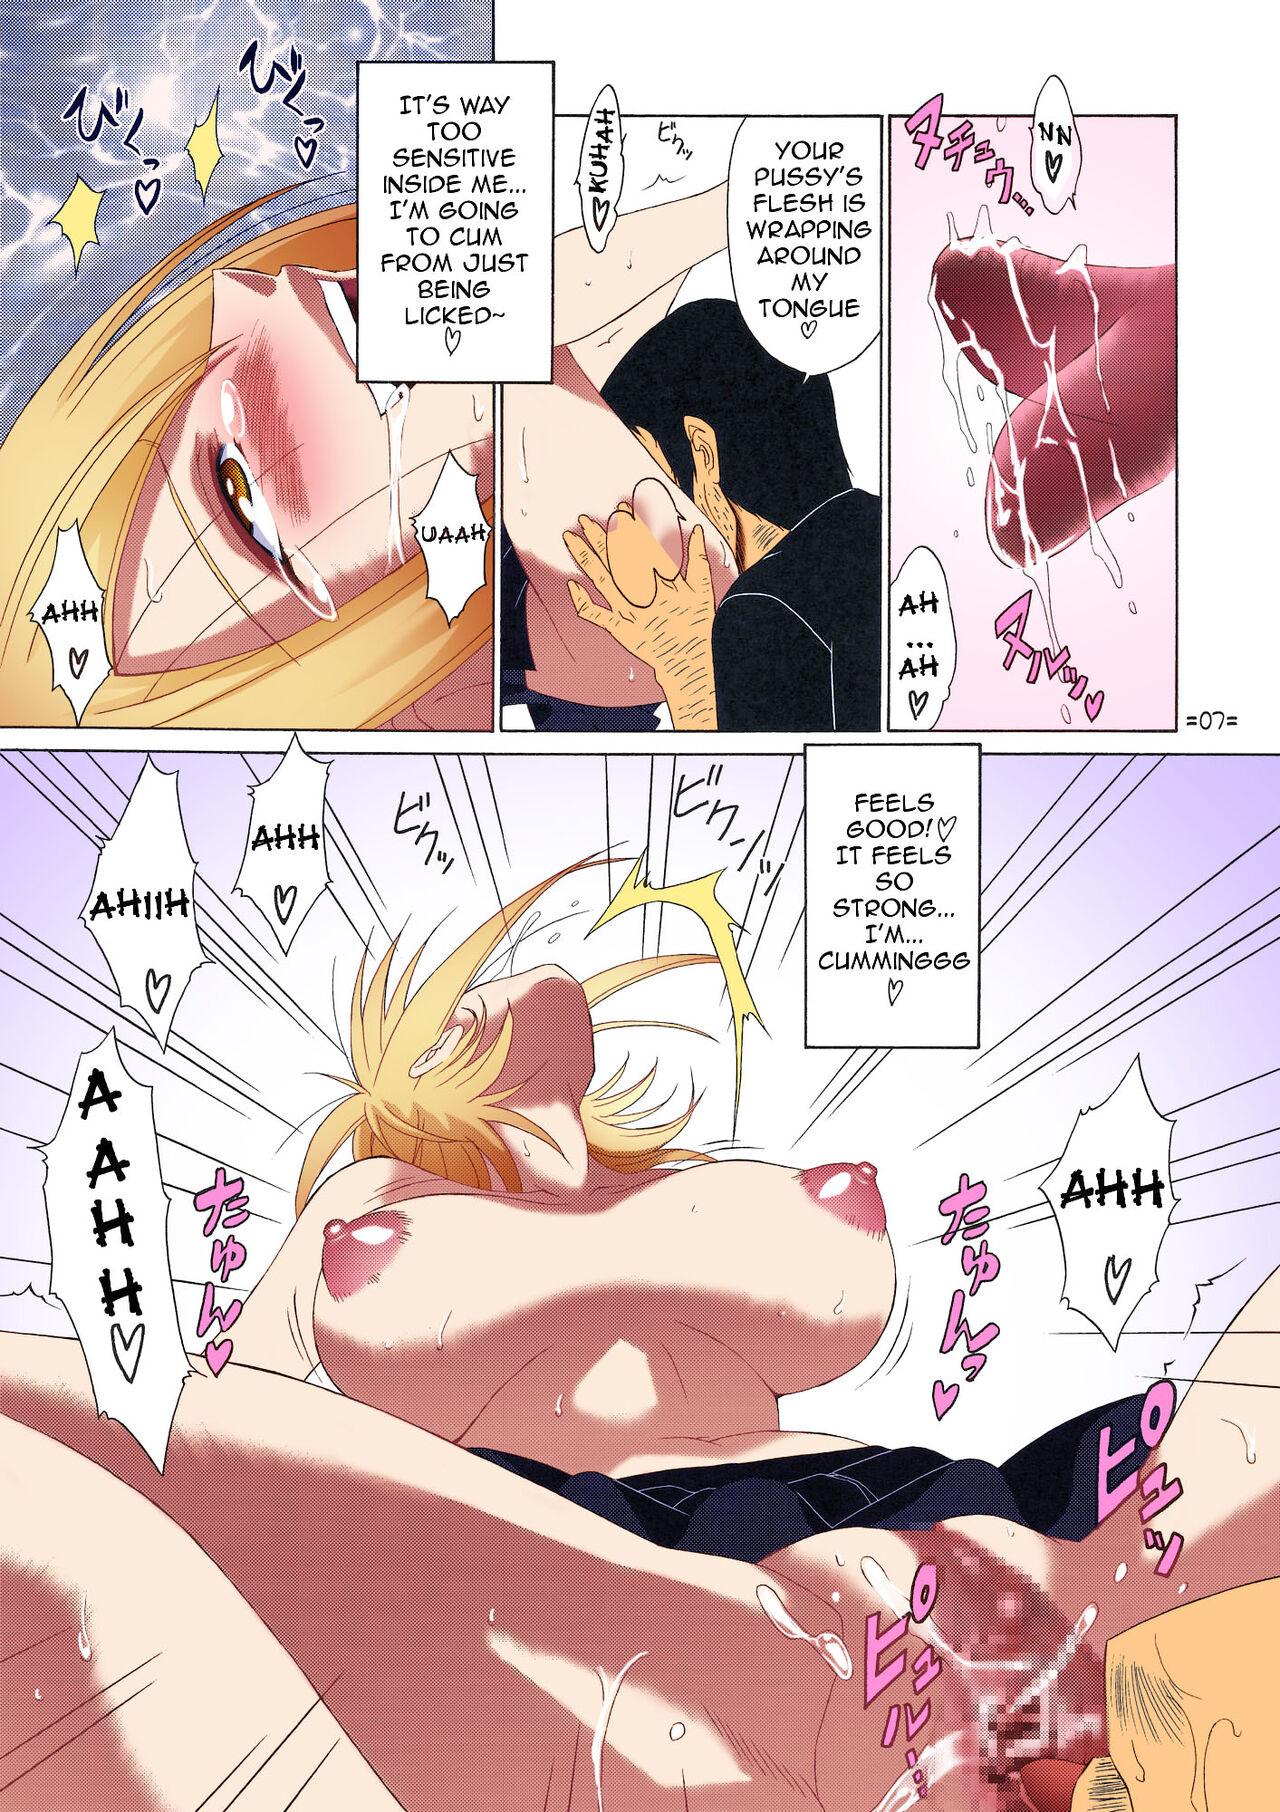 Girls Fucking FAIRY SLAVE II - Fairy tail Lesbos - Page 8